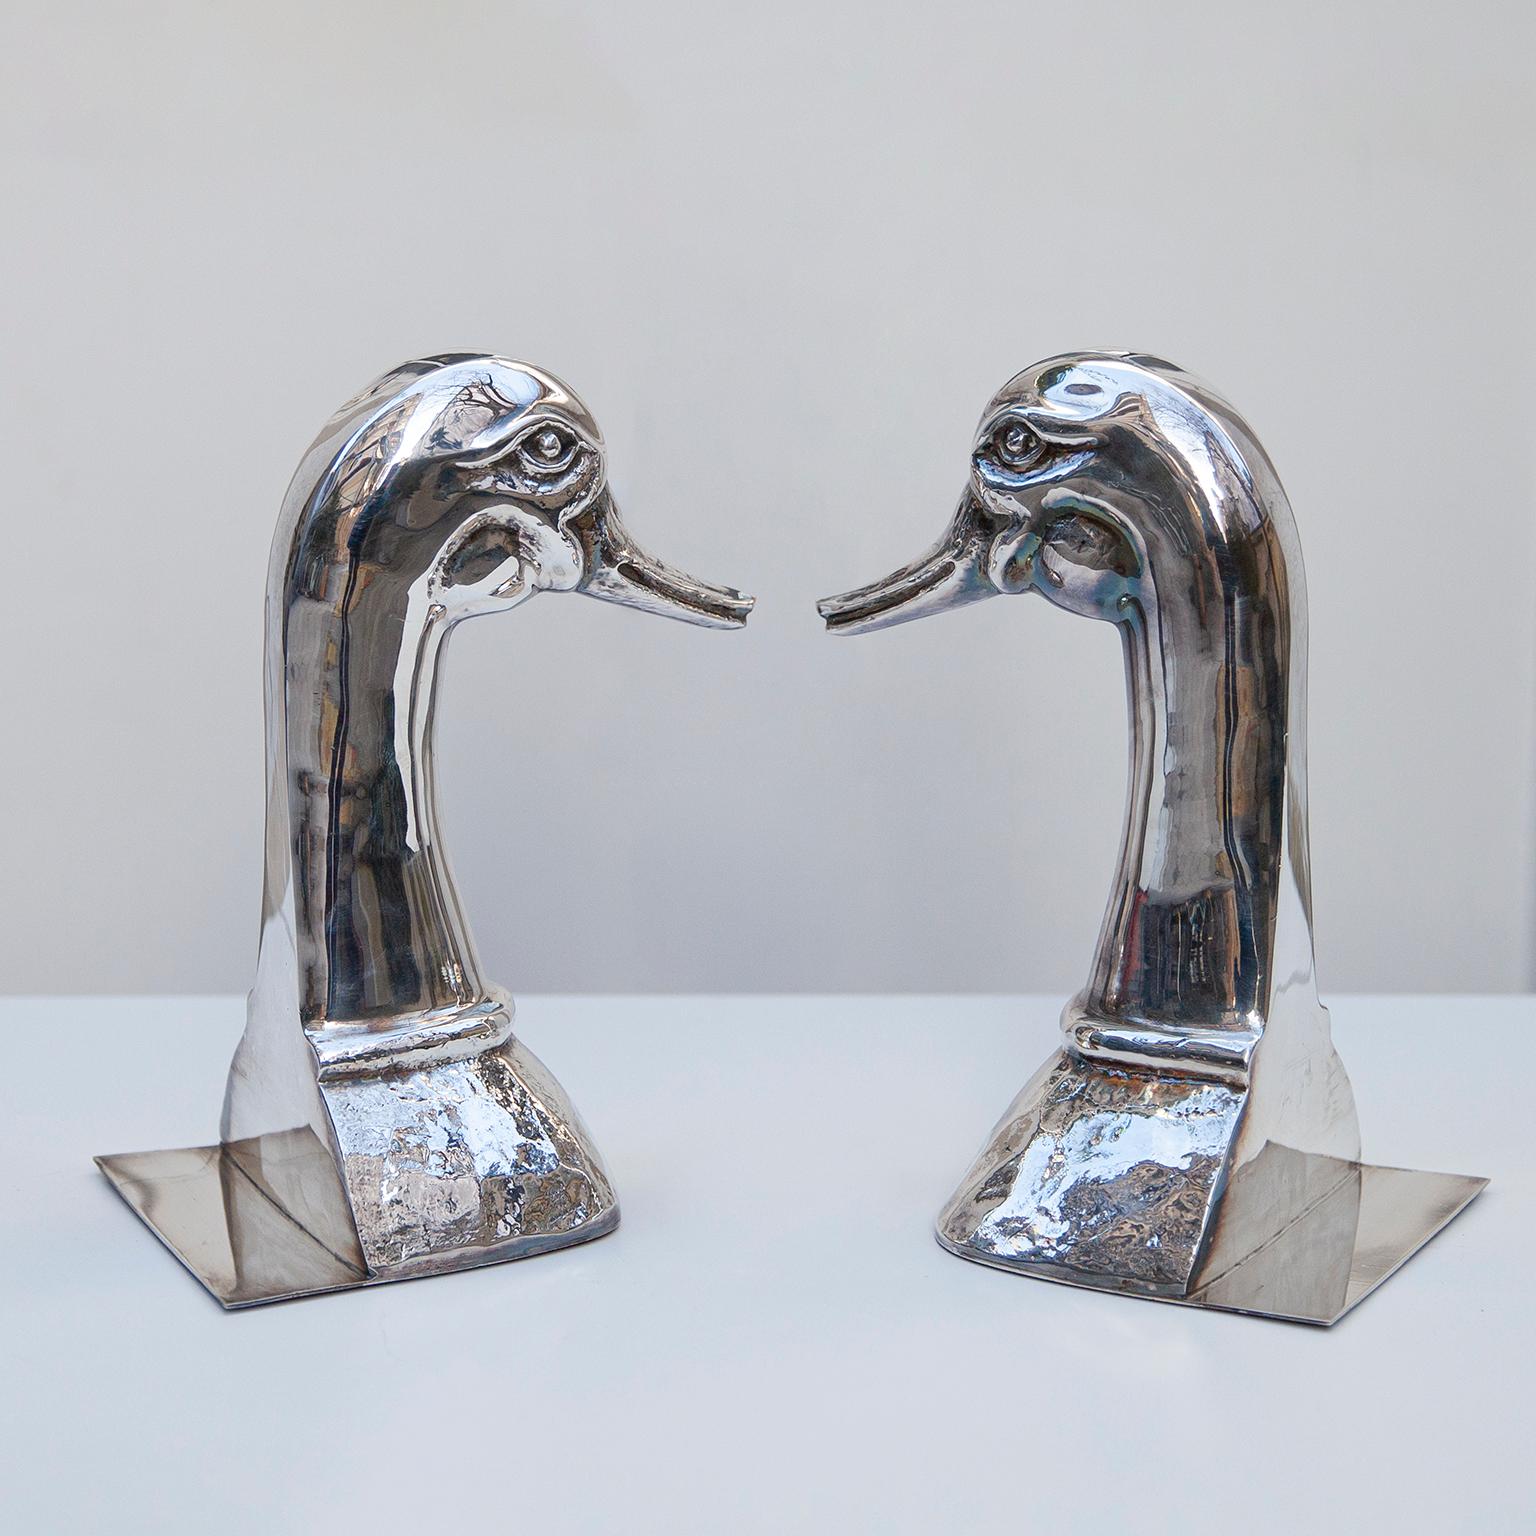 Hollywood Regency Silver Plated Duck Book Ends by Valenti, Spain, 1970s For Sale